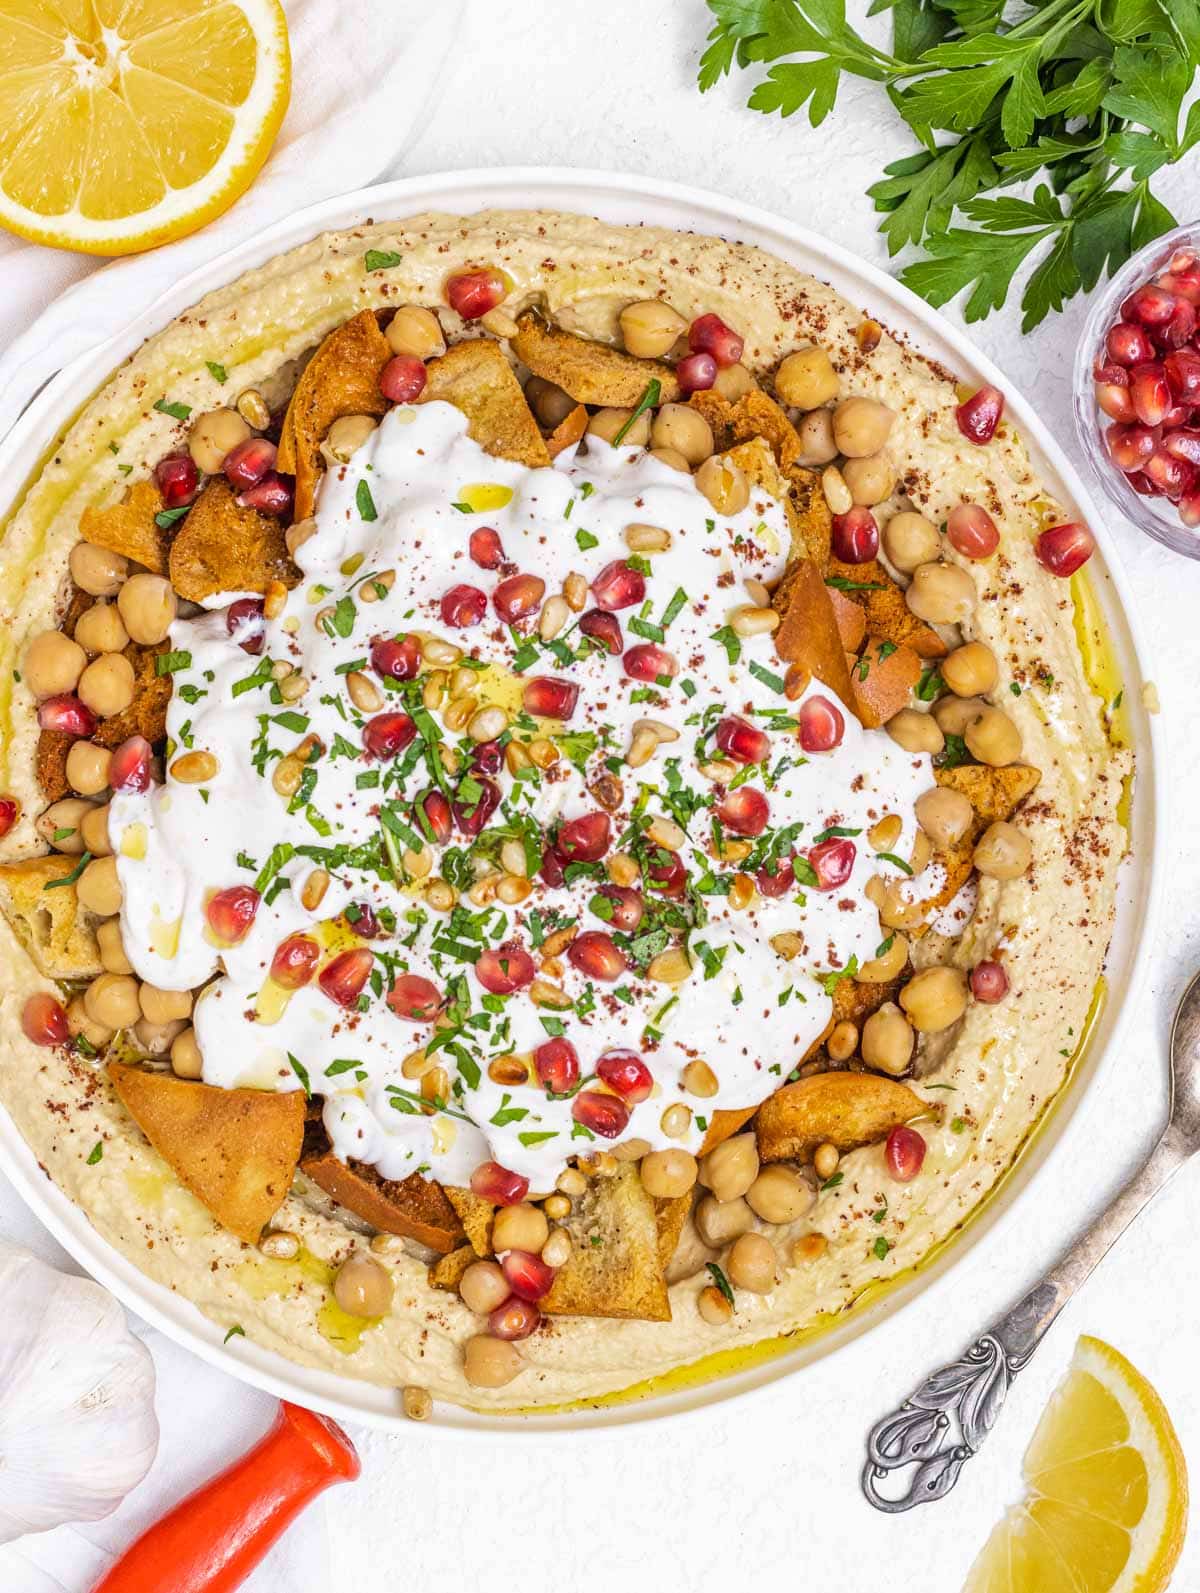 Fatteh hummus with pomegranate seeds